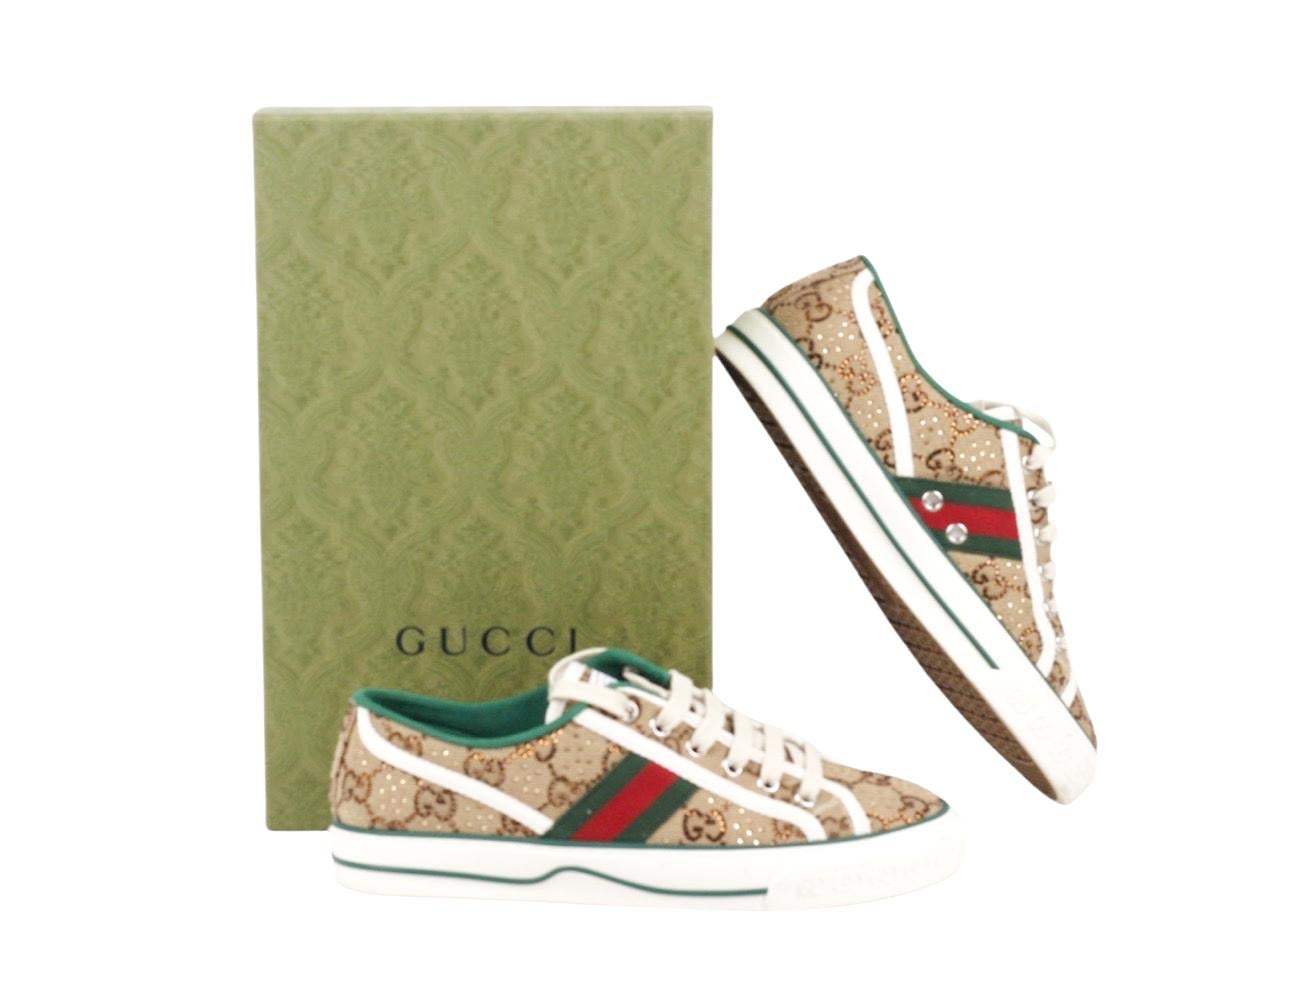 Stunning pair of Gucci GG Crystal Embellished Tennis Shoe/Trainer 1977 for sale. Worn once and in as new condition. Made in a size 38.5 (UK 5.5).

Colour
Beige, Green, Red
Material
Leather Canvas, Crystals
Hardware
Silver
Condition
Used